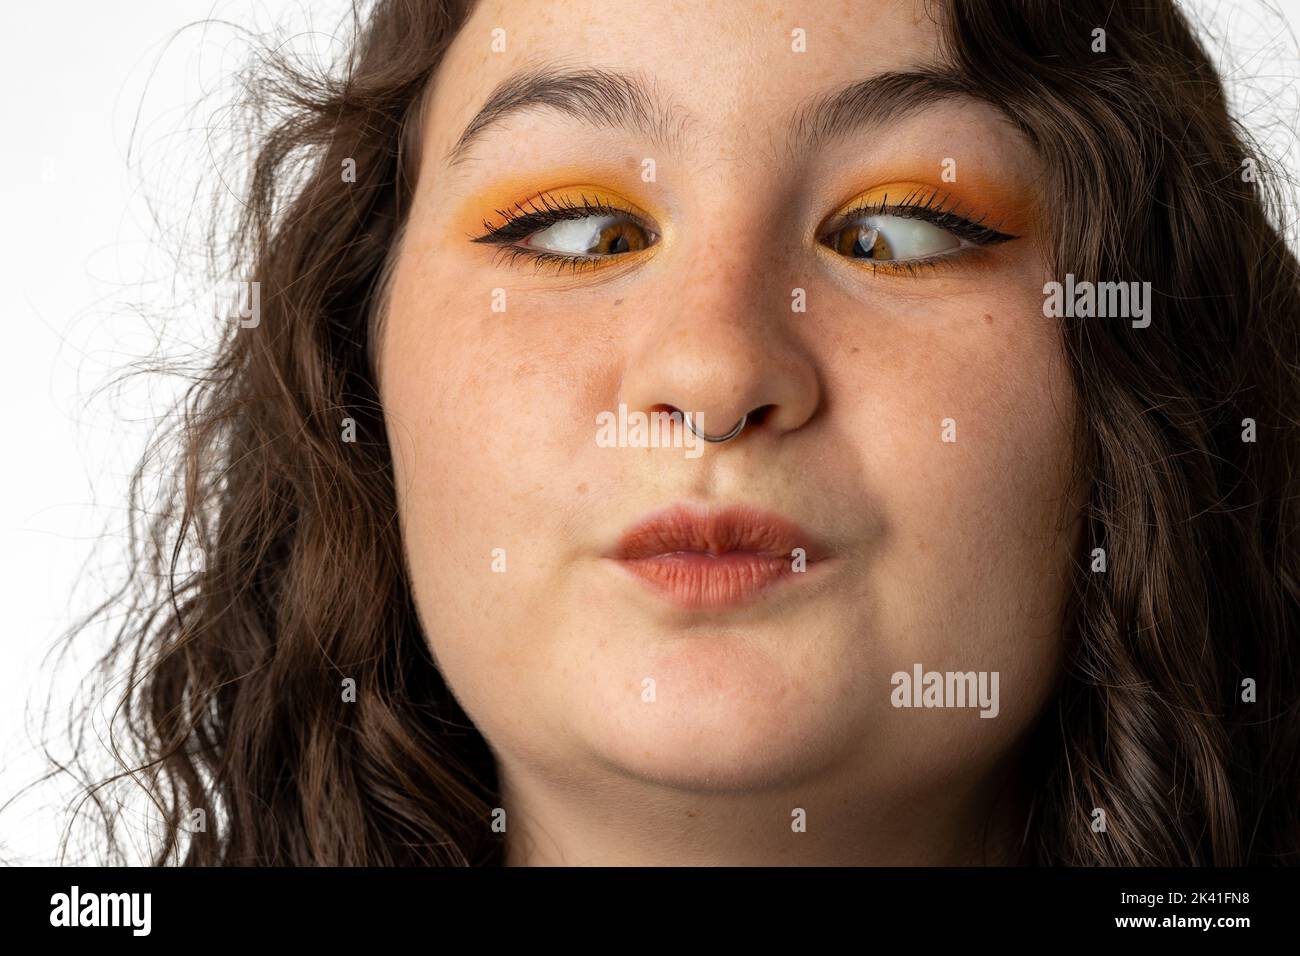 Close-up of beautiful woman making funny cross-eyed face Stock Photo